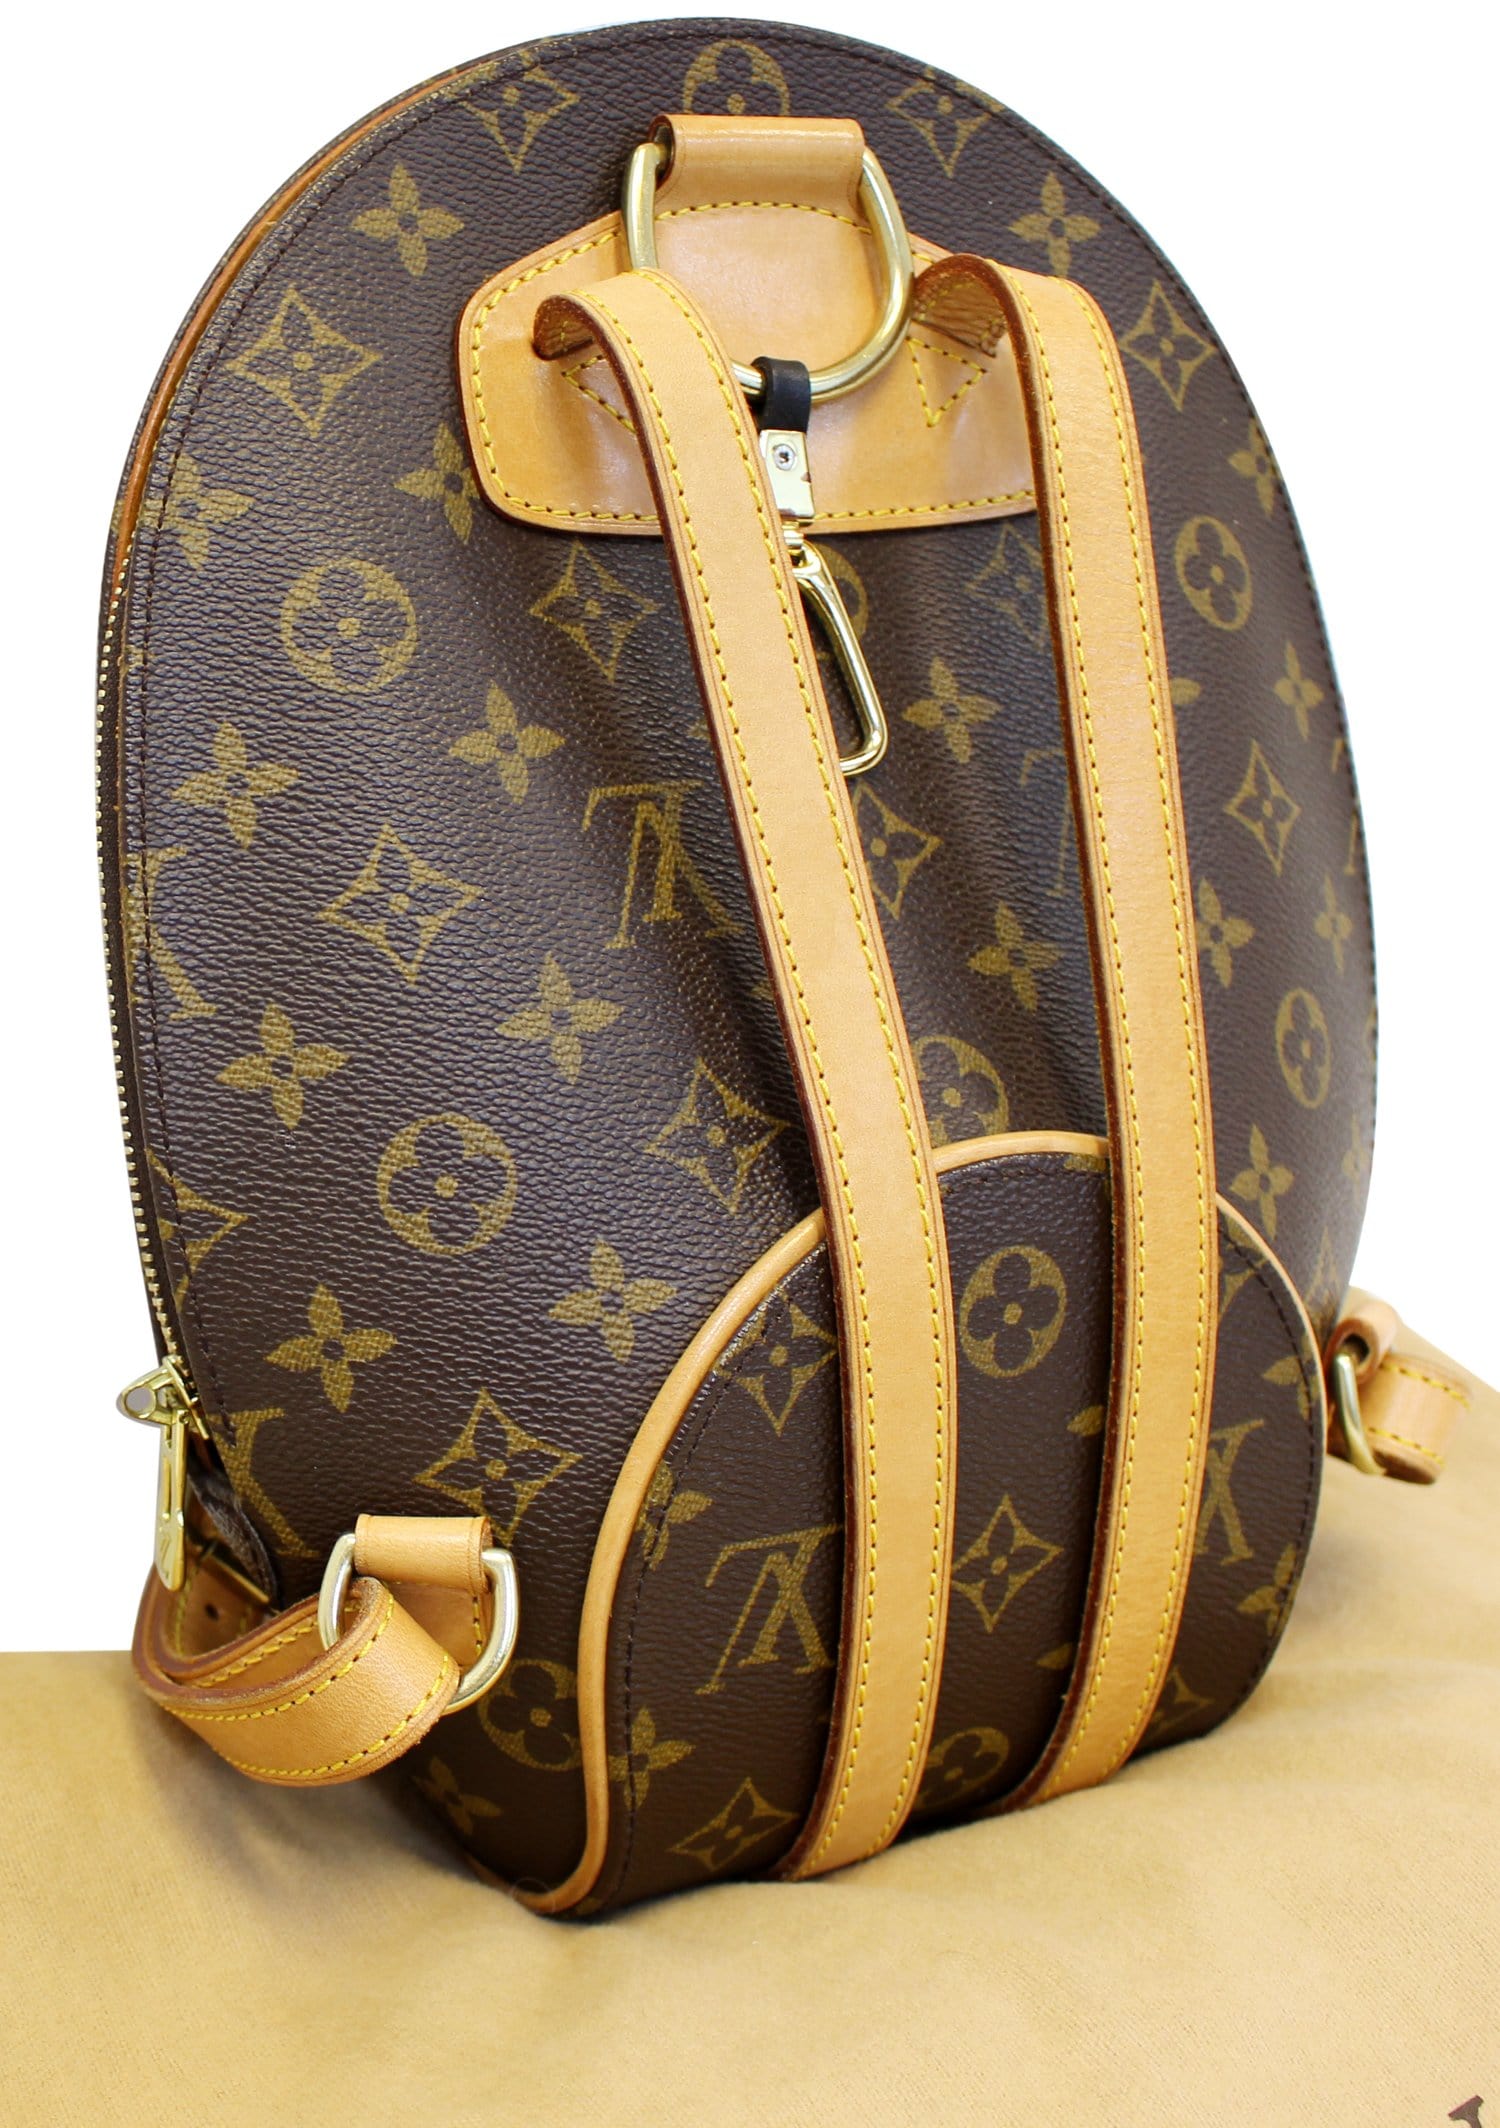 lv tote backpack